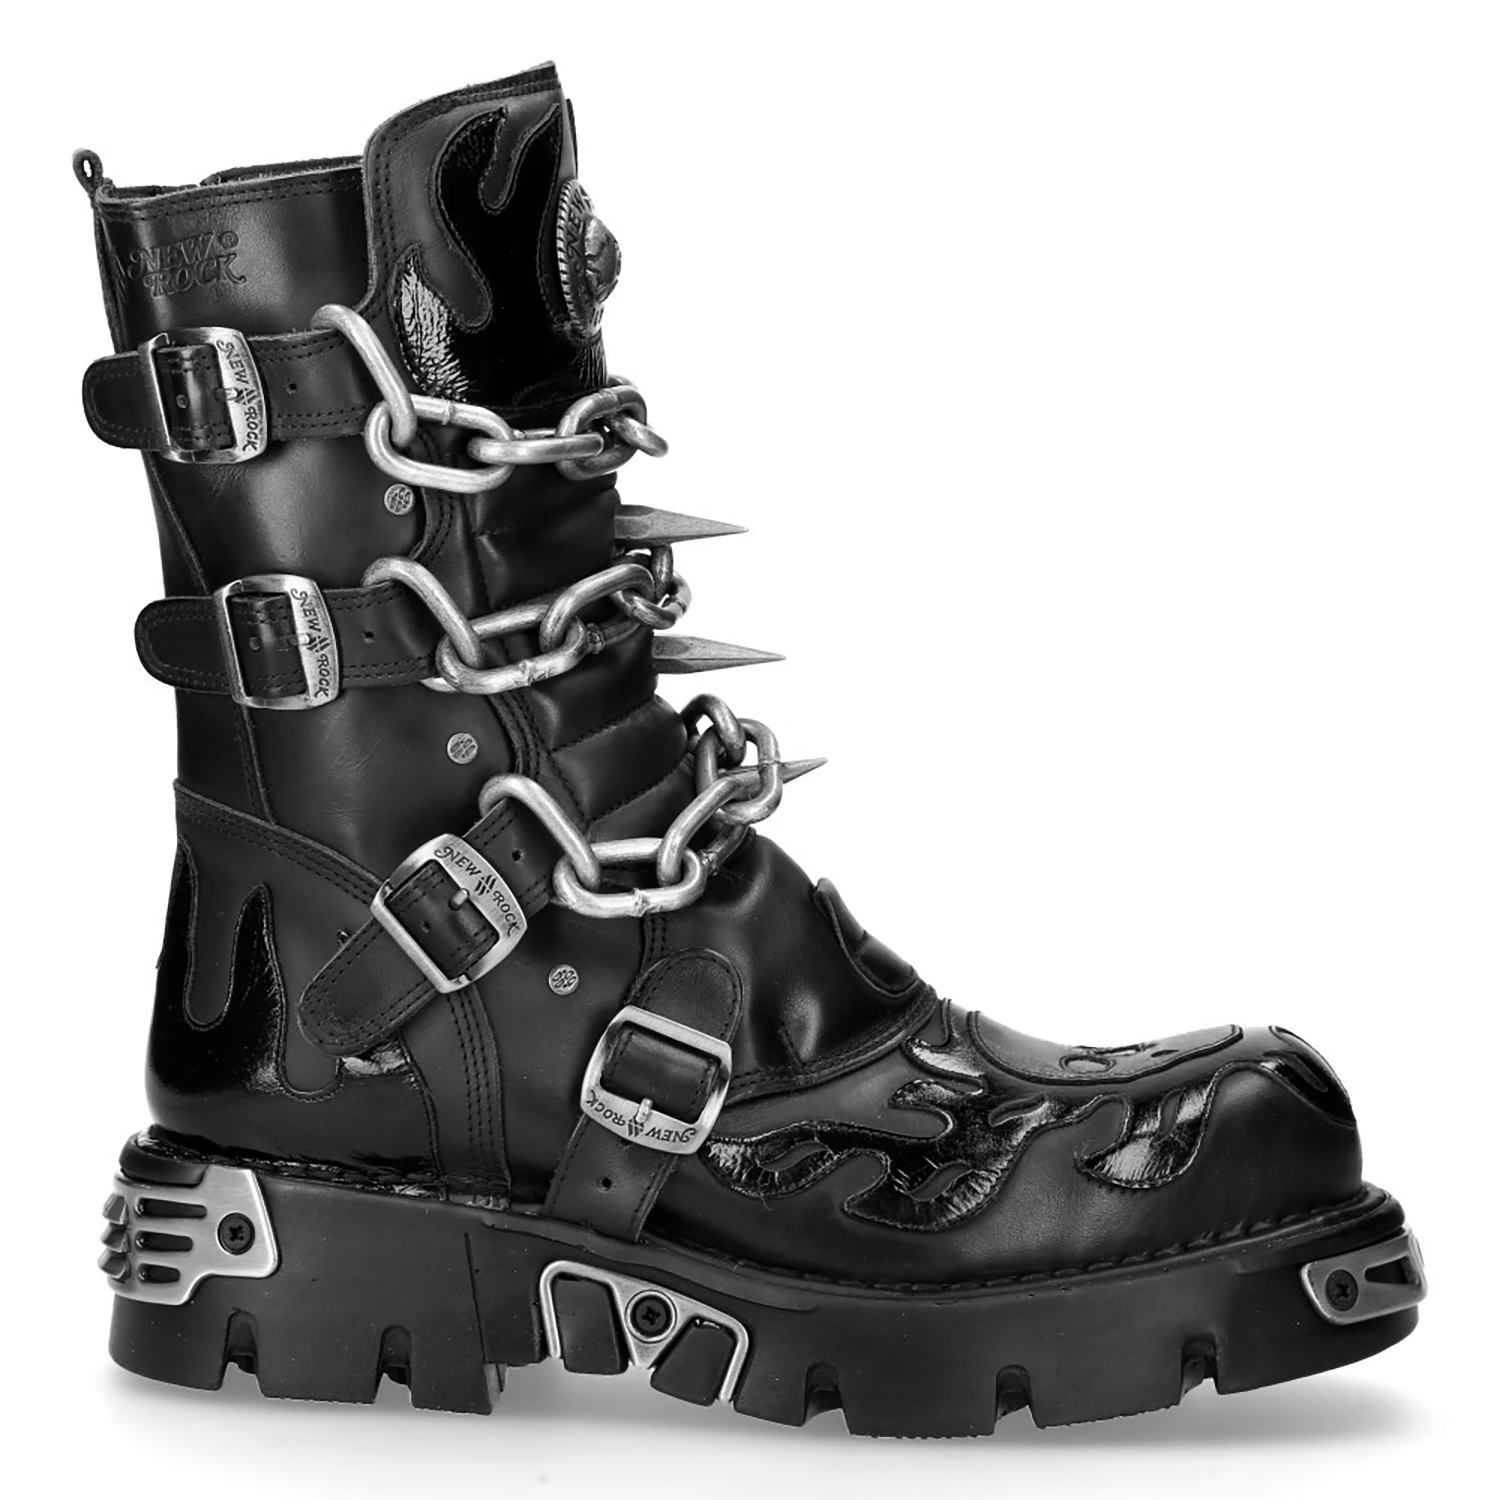 Black New Rock Boots with Chains and Nails M.727-S5 • the dark store™